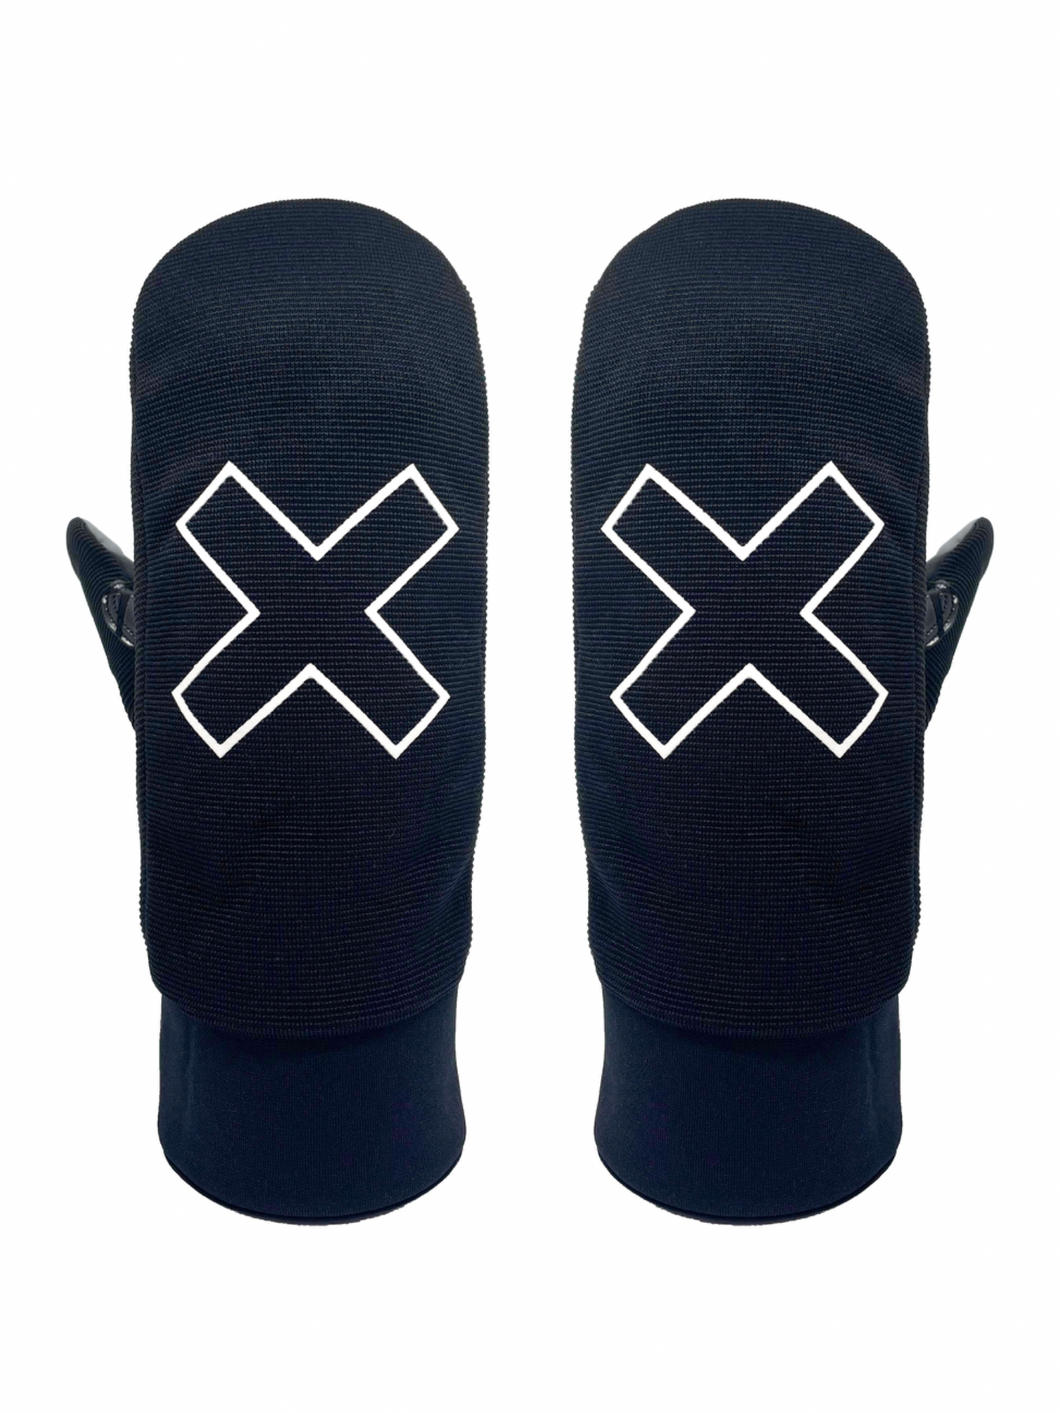 Stealth X Mitts from Sweetmitts are the best snowboard mittens available. These stylish black snowboard mitts feature a white silicone outline X on the top with a smooth neoprene cuff. The Stealth X mitts can be used as mittens for skiing or snowboarding and will ensure you look stylish while you shred the slopes.